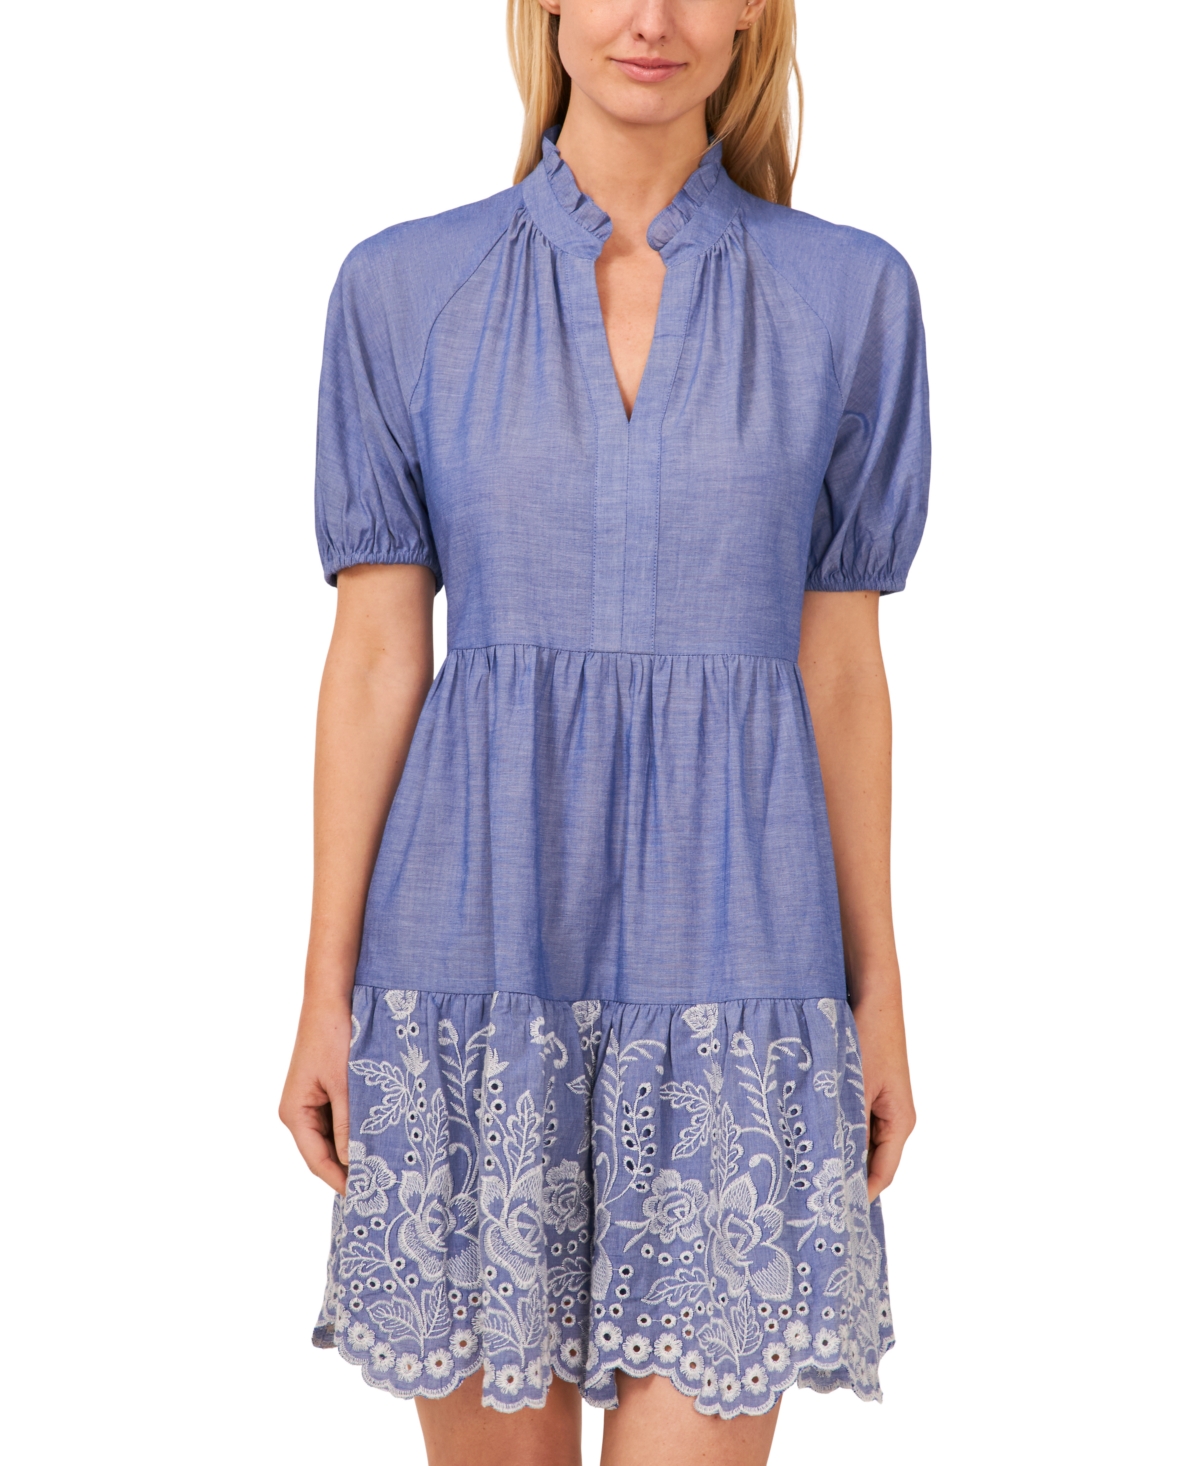 Women's Floral Embroidered Cotton Babydoll Dress - Blue Air